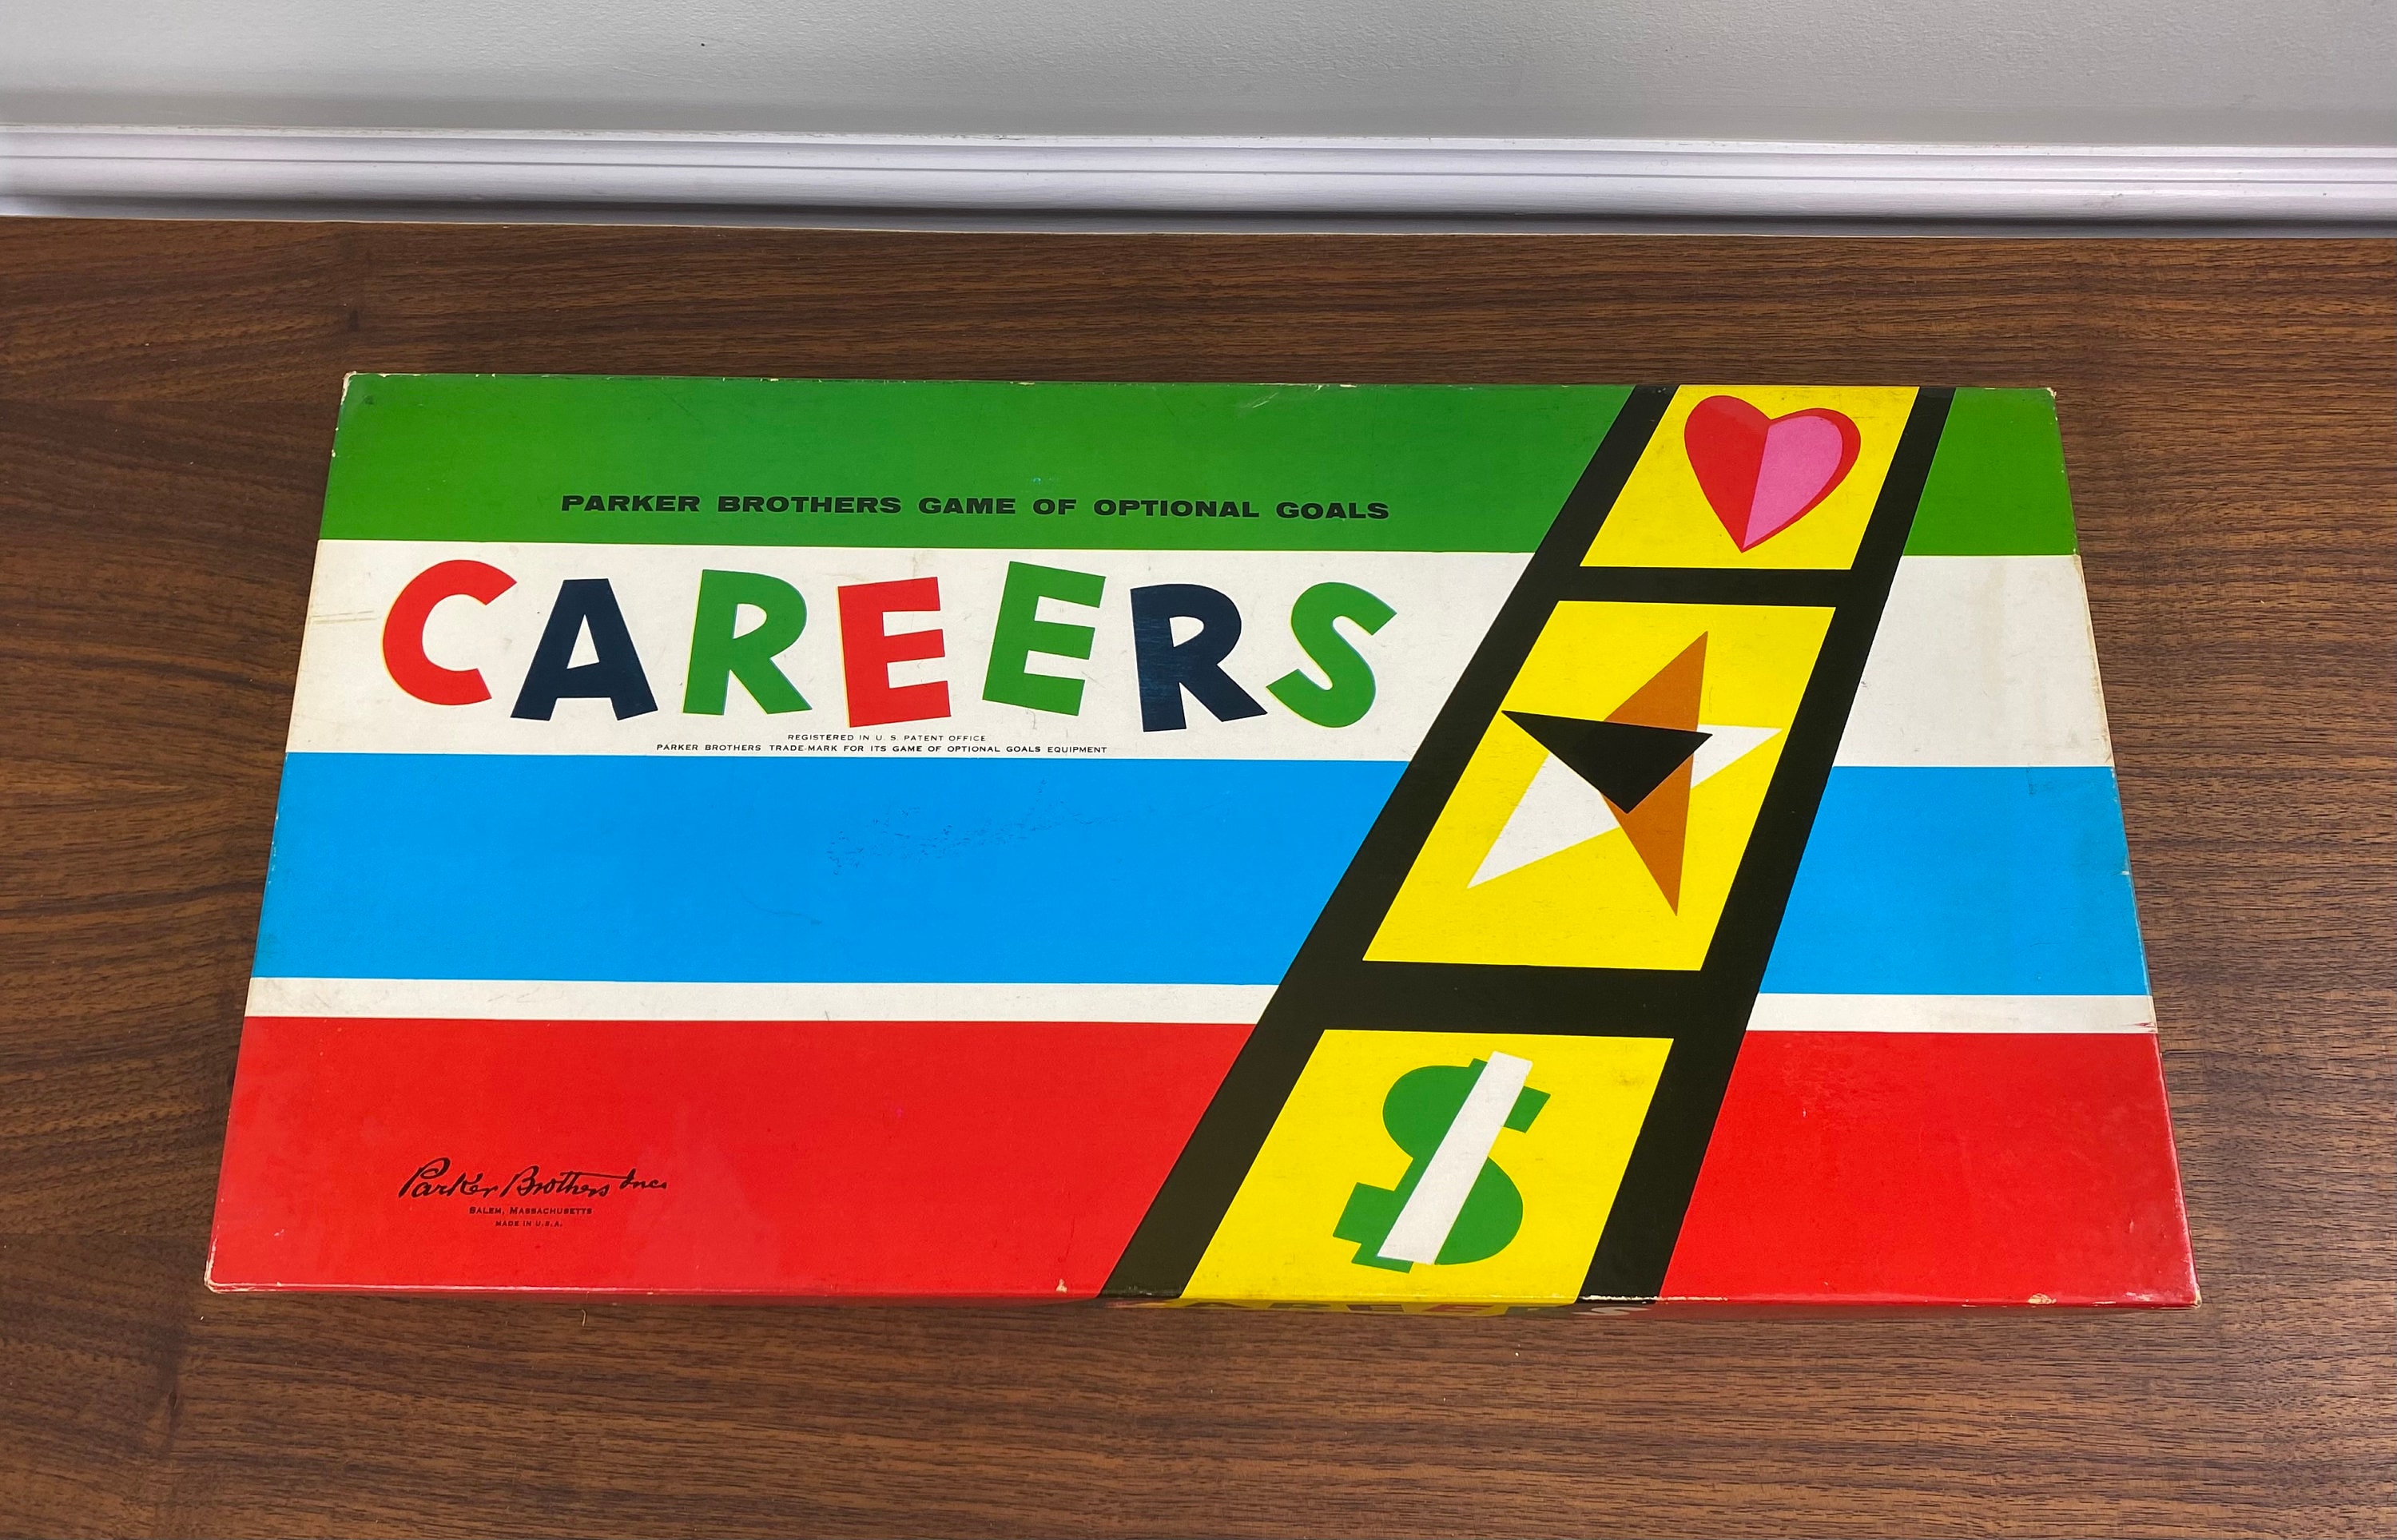 Vintage 1957 Edition Careers Board Game Parker Brothers image